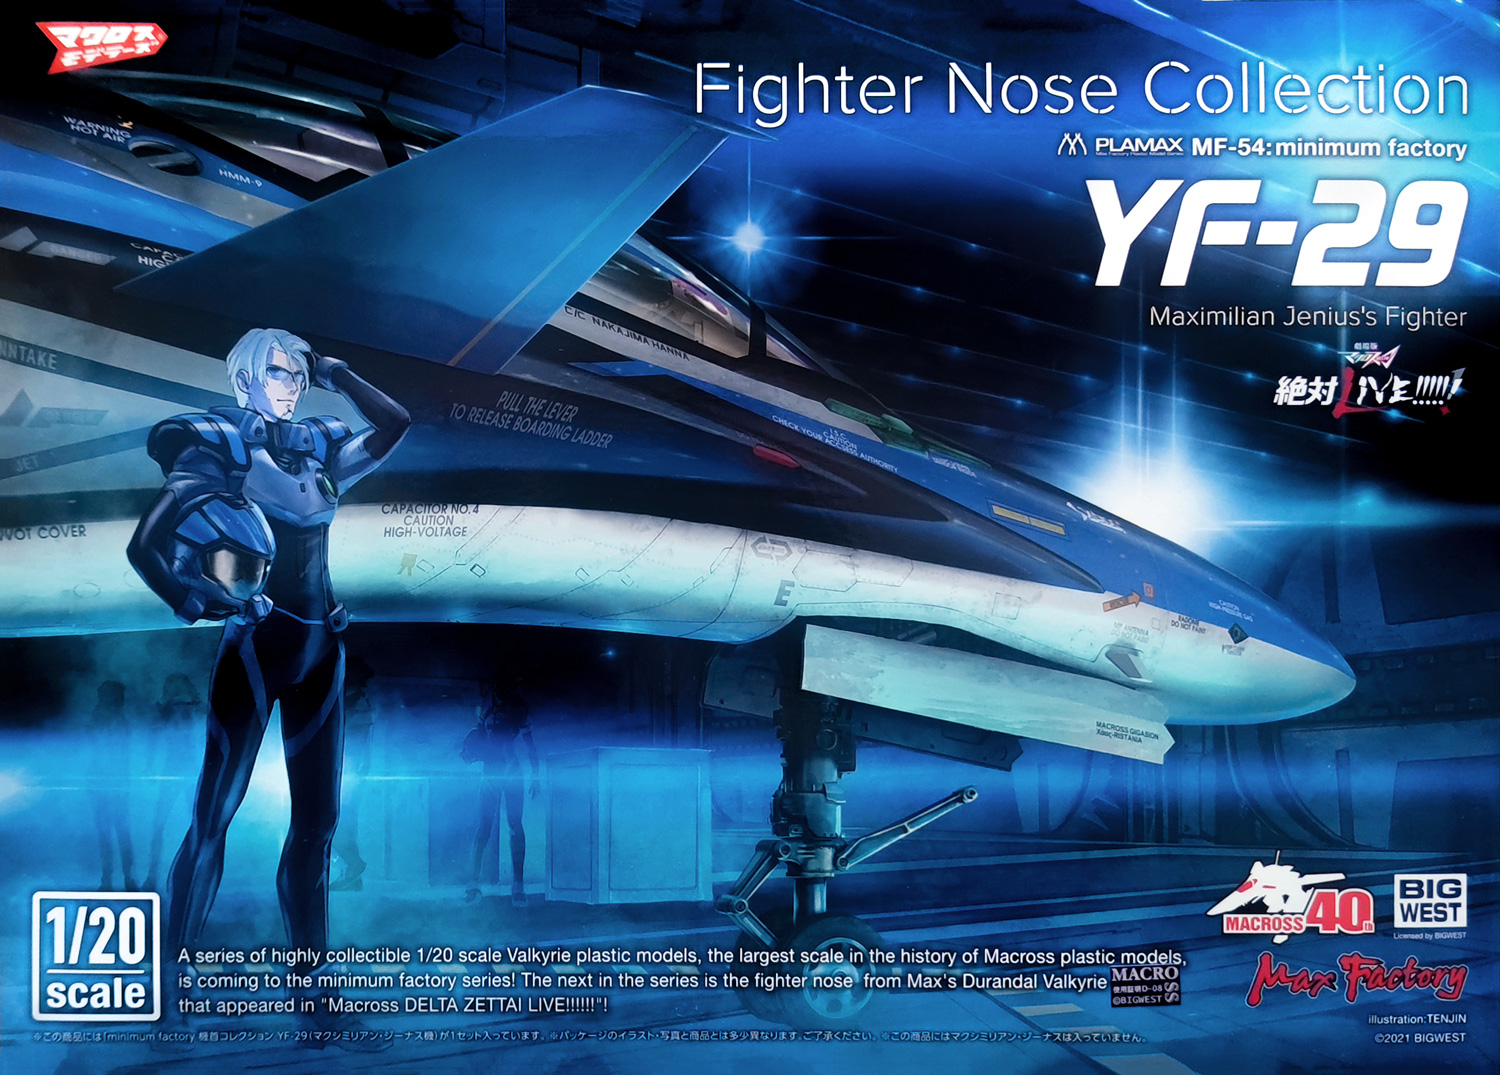 MAX FACTORY MACROSS Plamax Fighter Nose Collection YF-29 (Maximilian Jenius’ Fighter)